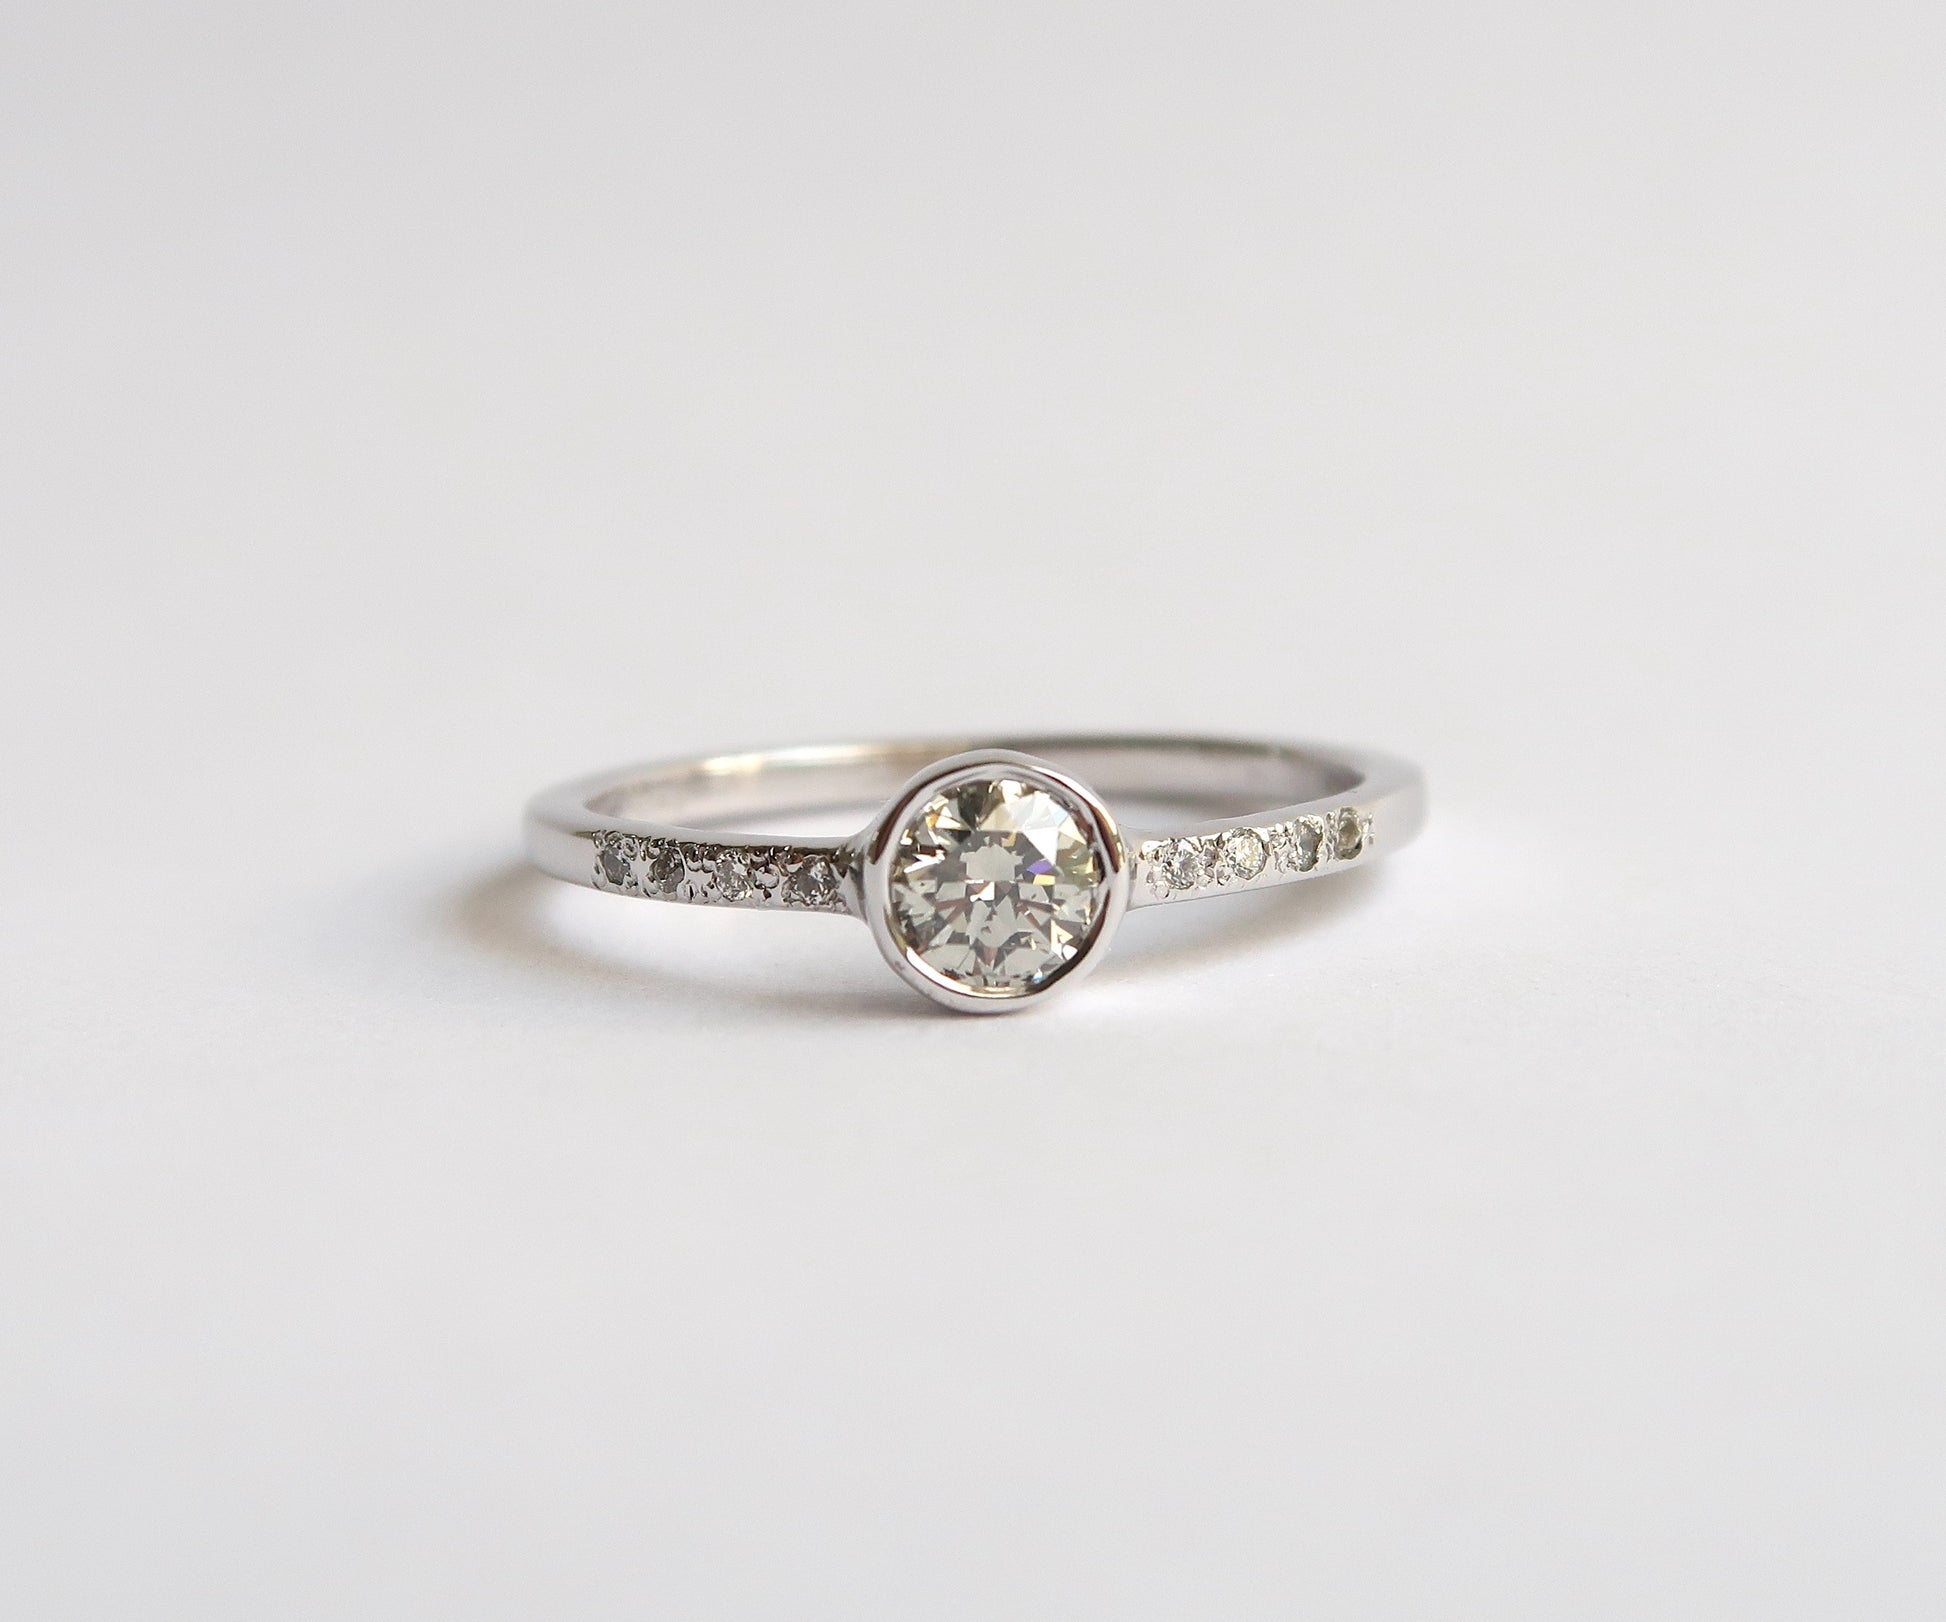 Diamond solitaire ring in white gold